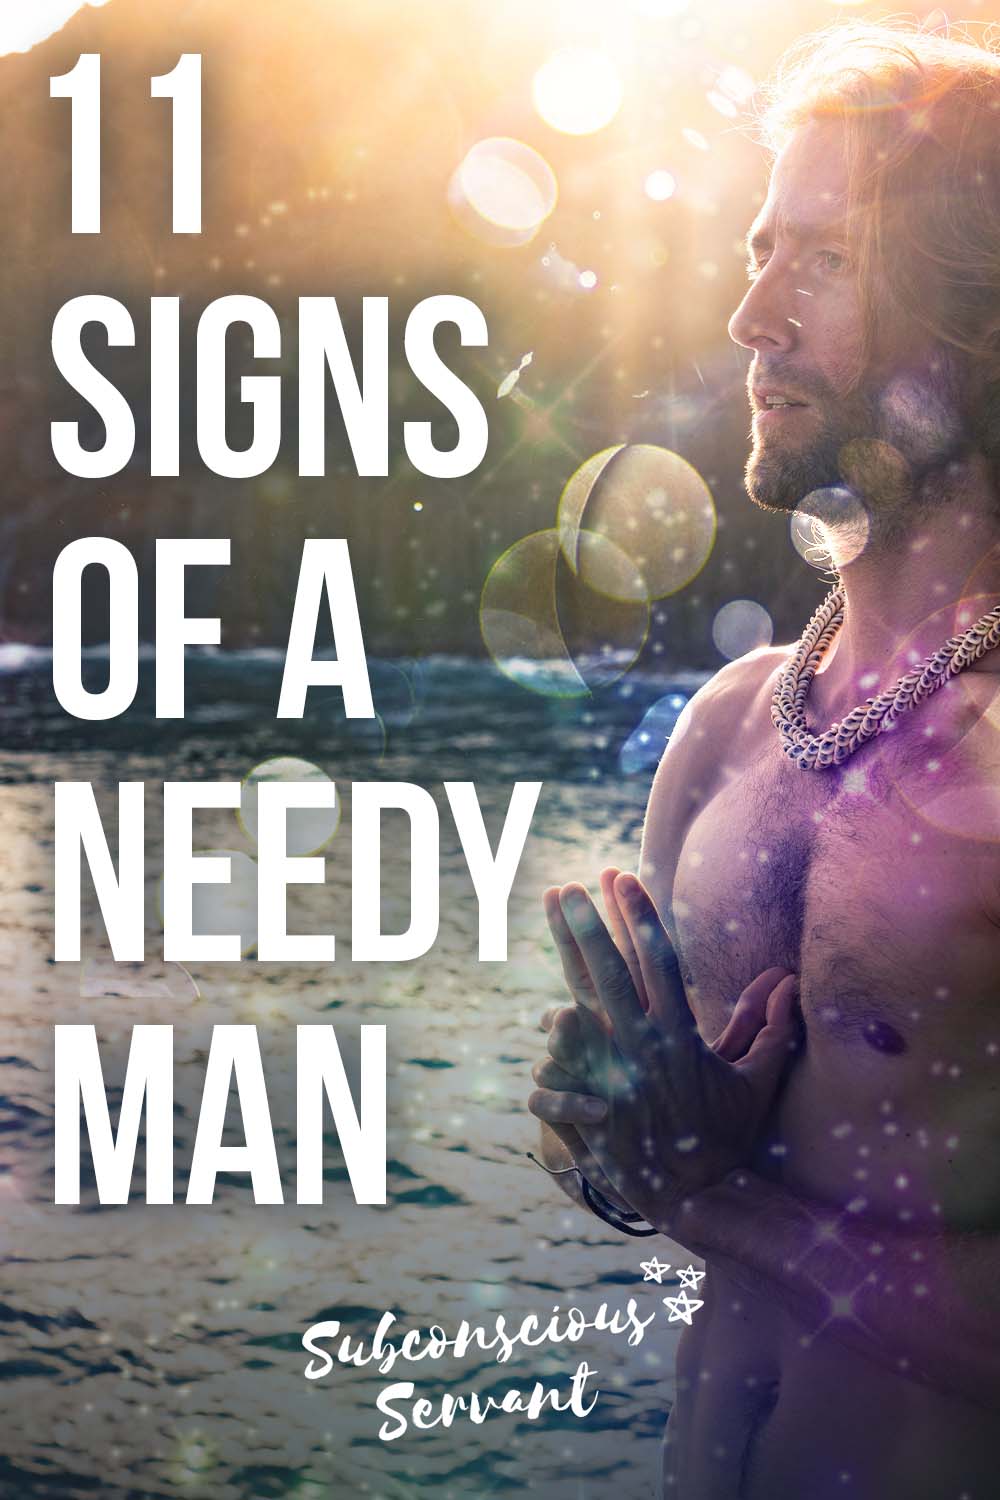 11 Signs Of A Needy Man + How To Loving Deal With Him